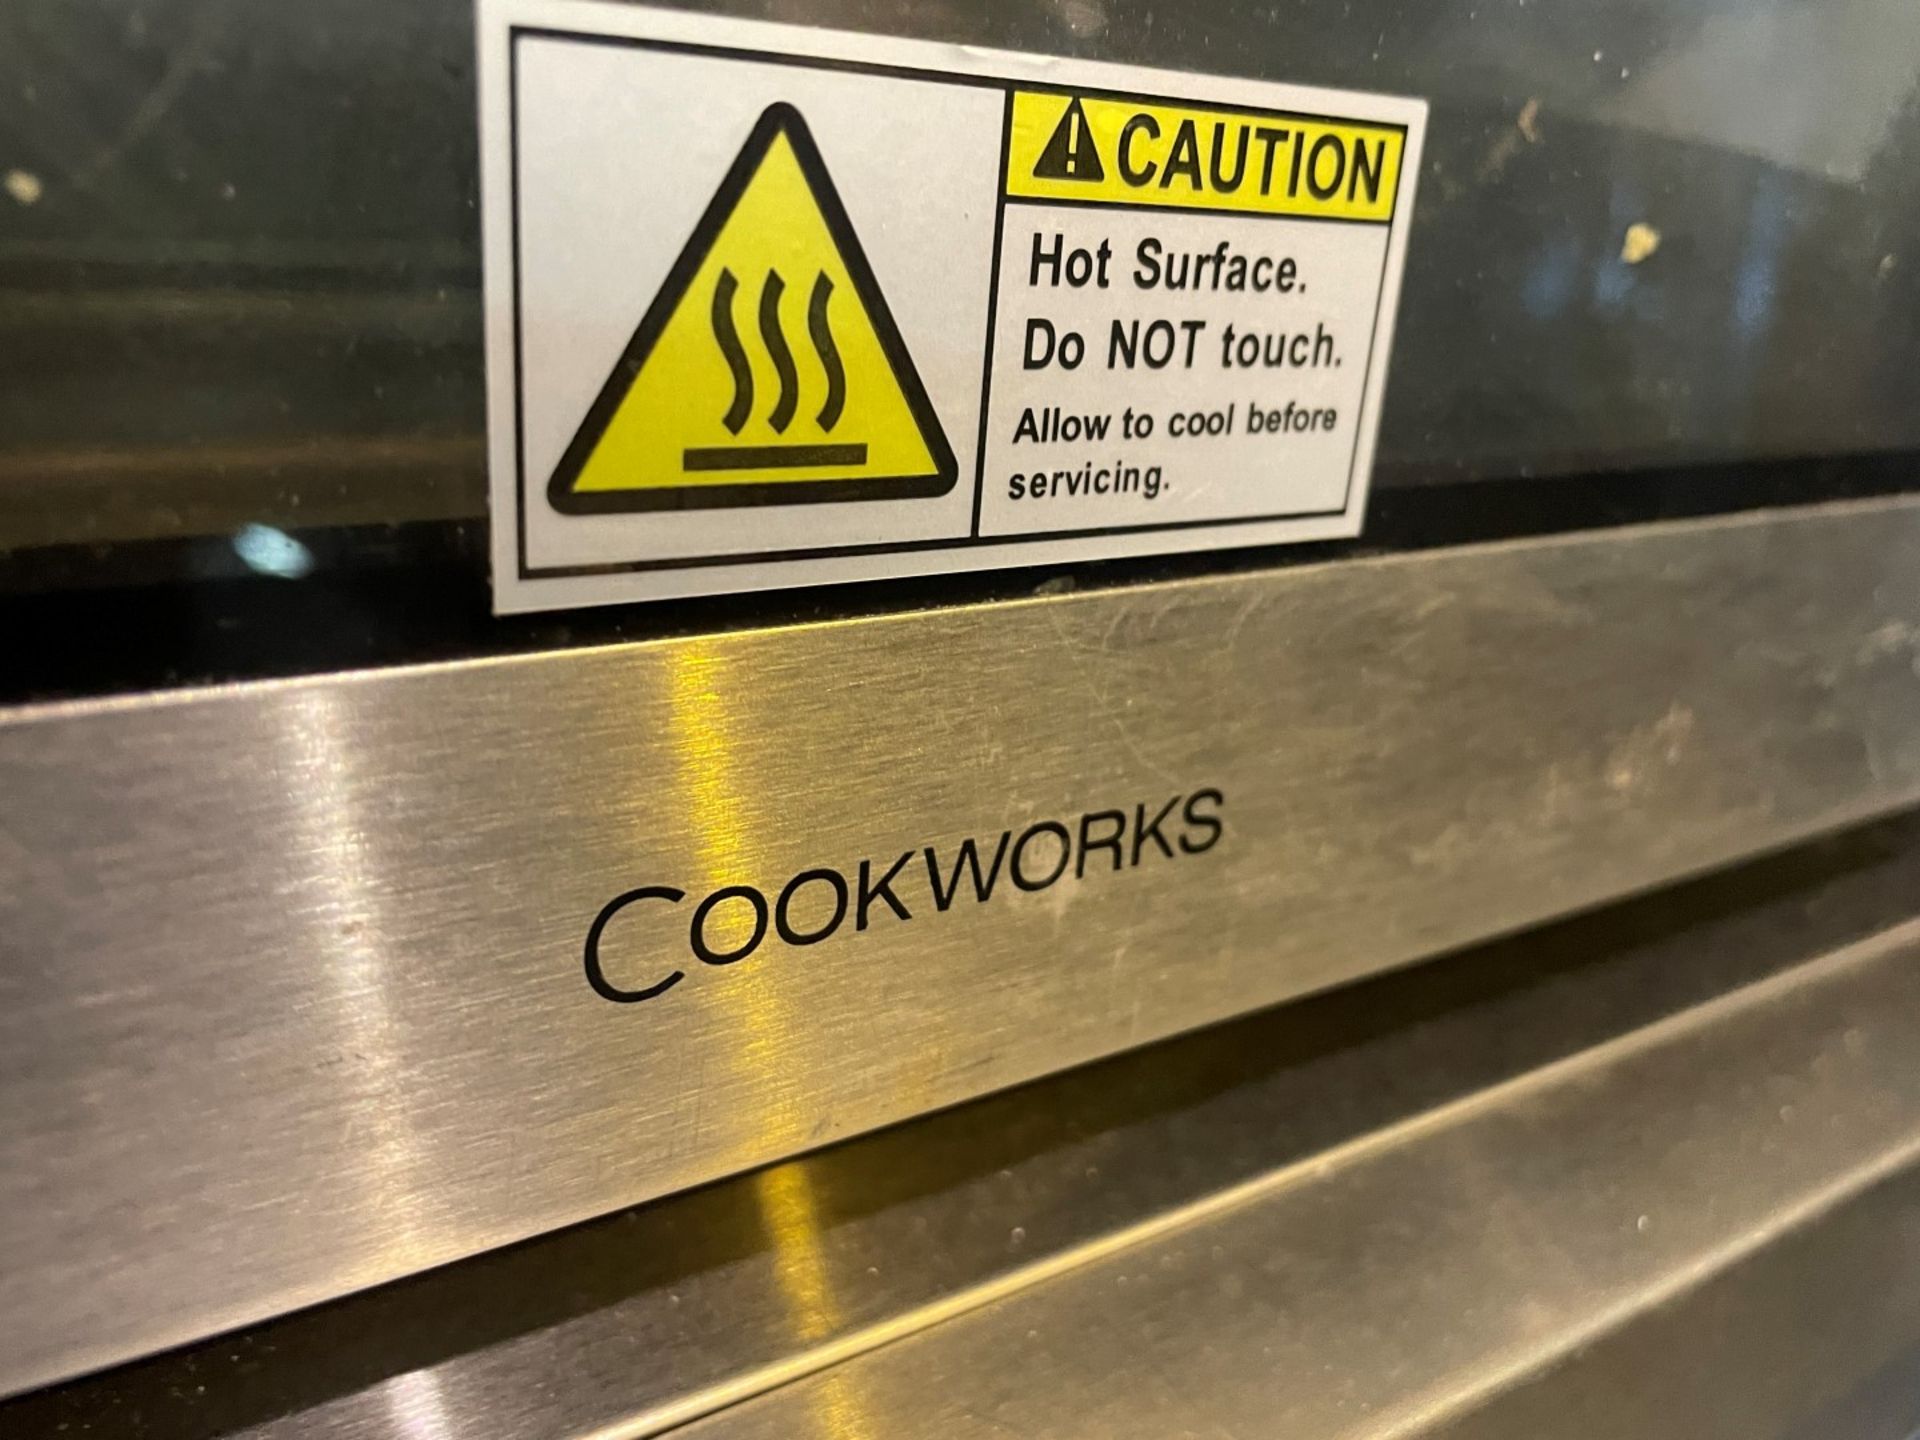 1 x Cookworks Countertop Oven With a Stainless Steel Finish - Image 2 of 4